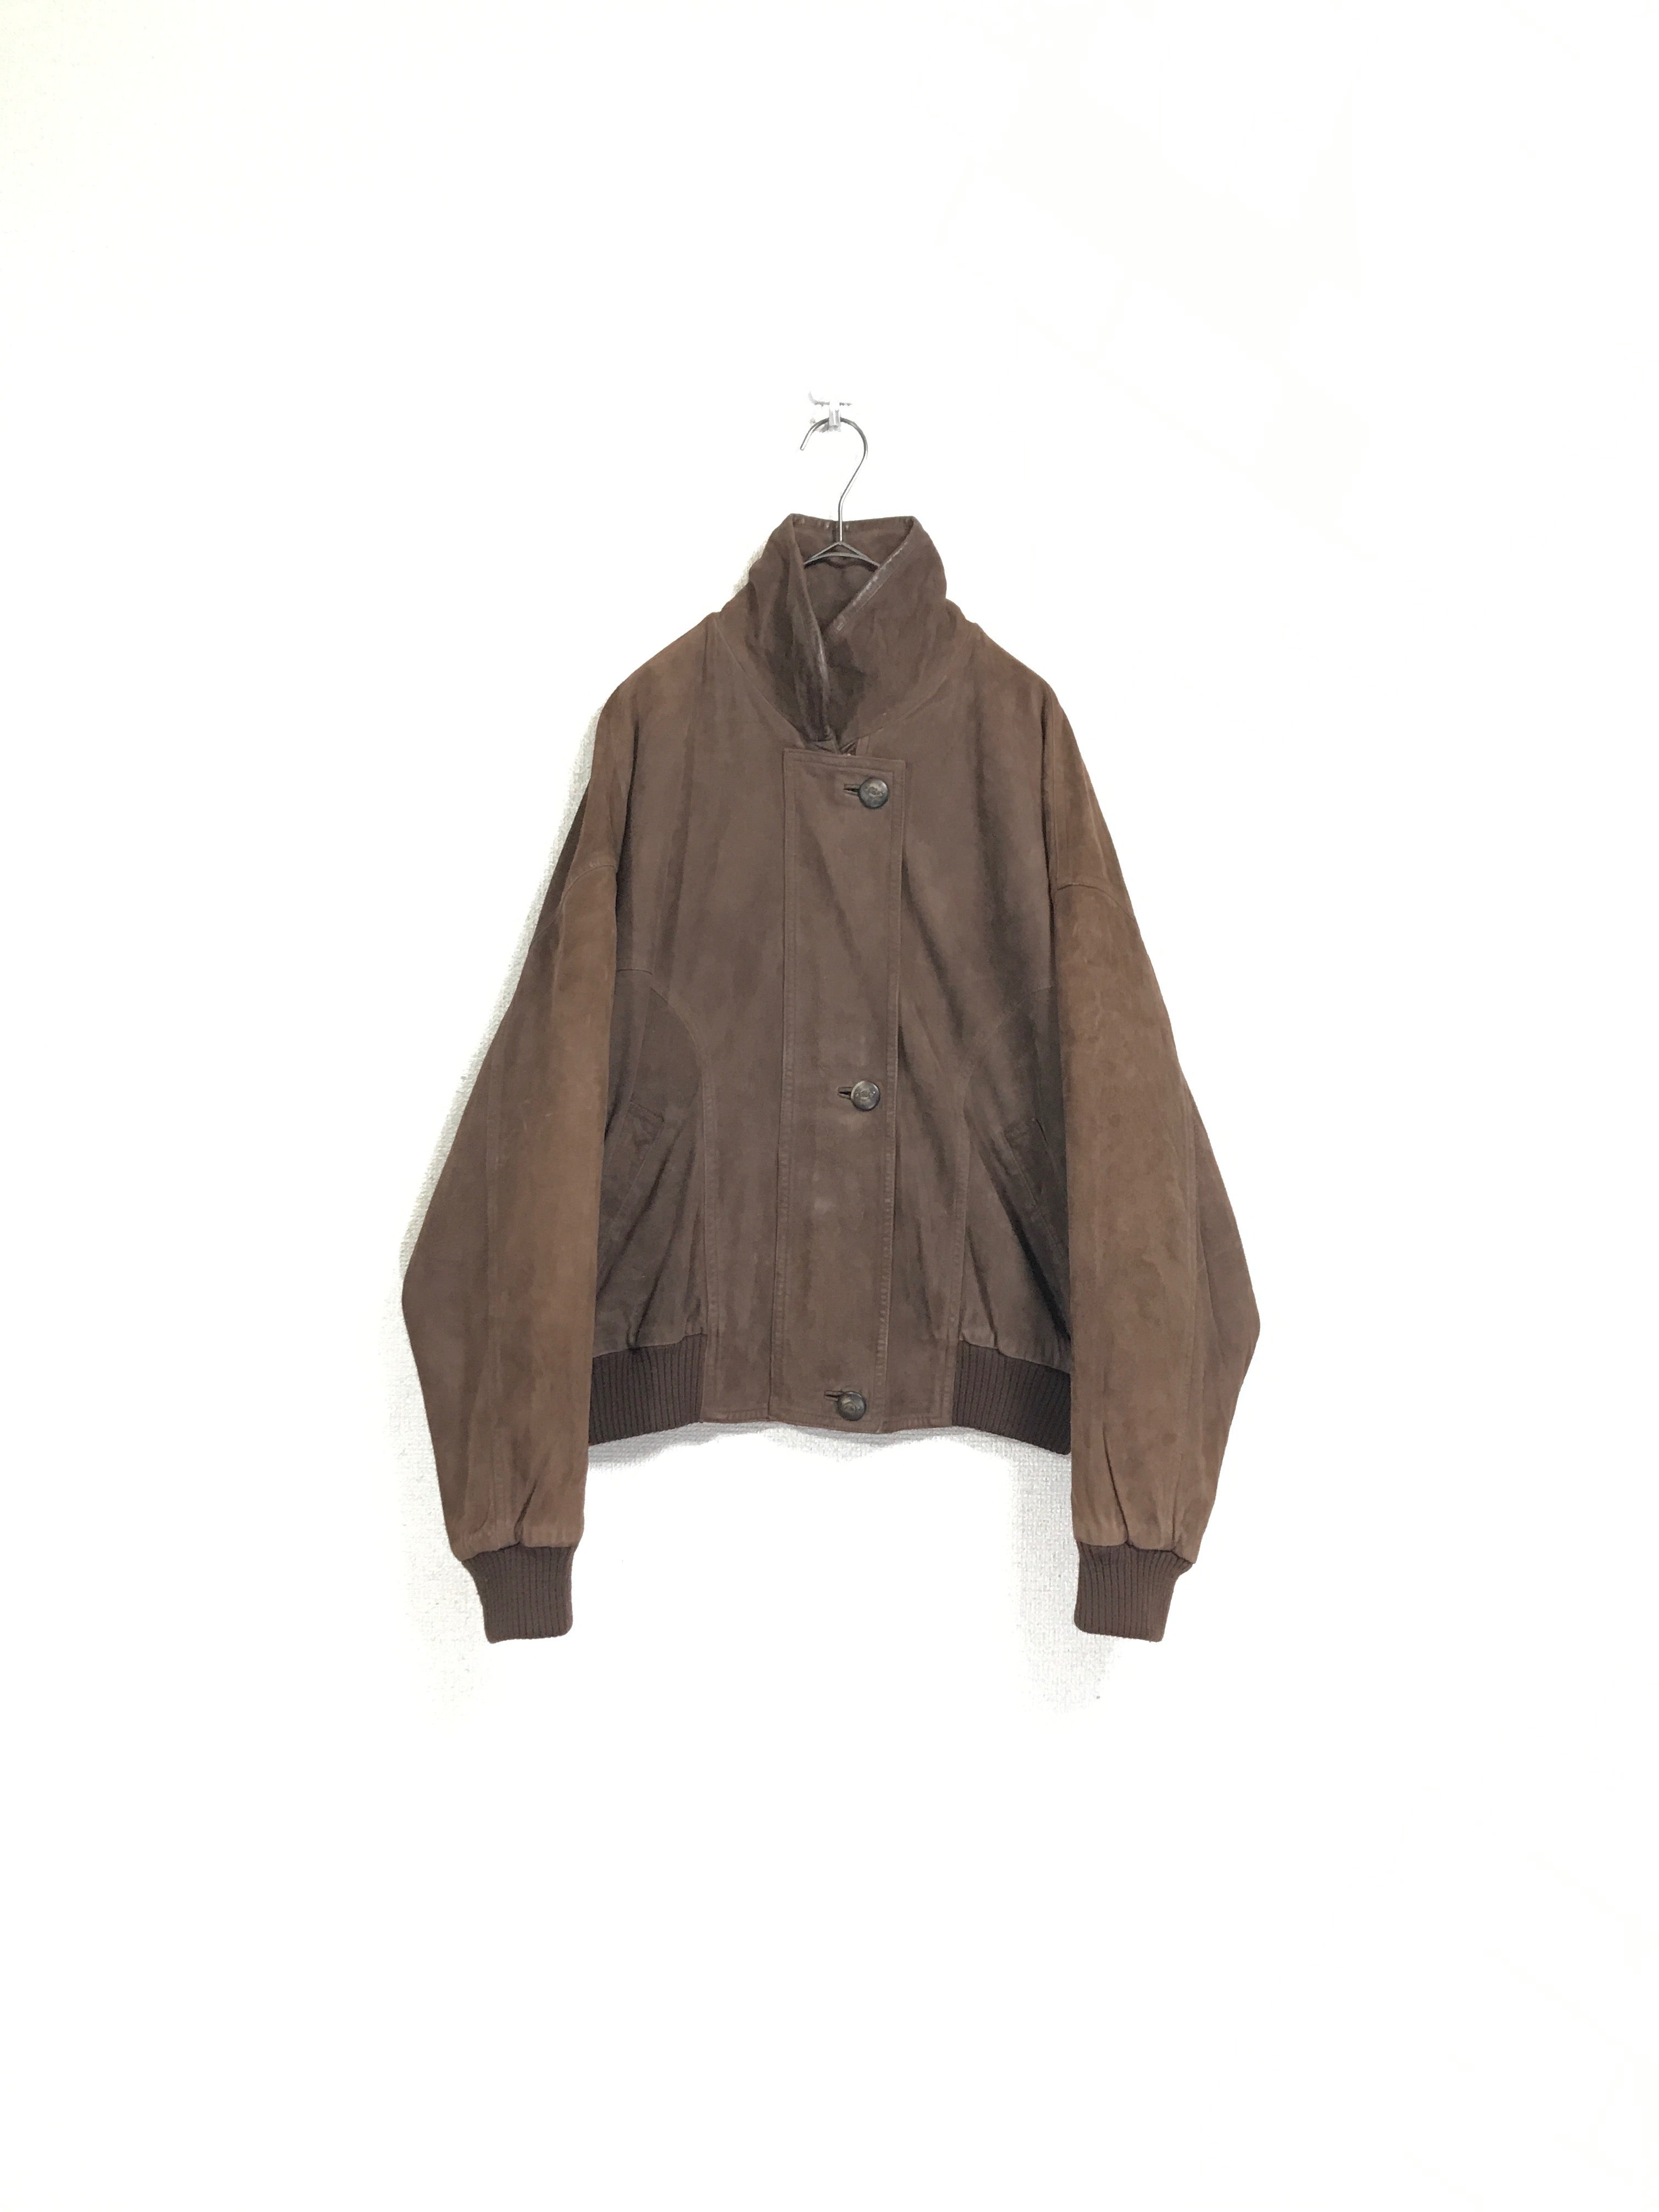 80’s GUCCI suede leather blouson